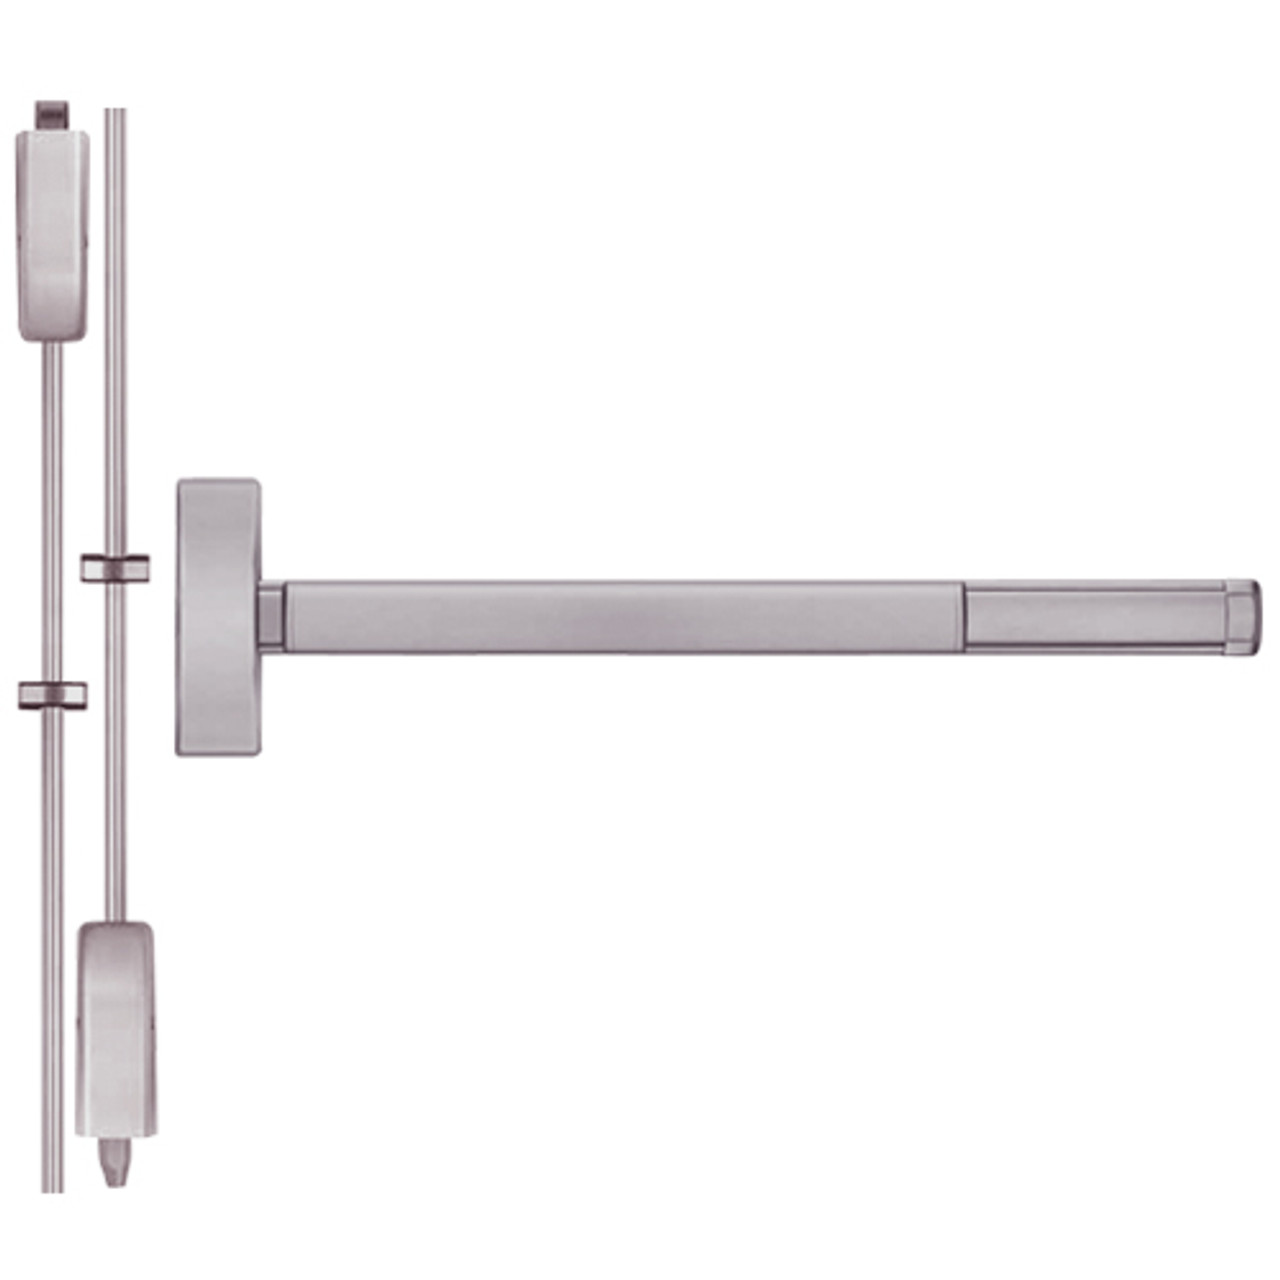 DE2202-630-48 PHI 2200 Series Non Fire Rated Apex Surface Vertical Rod Device with Delayed Egress Prepped for Dummy Trim in Satin Stainless Steel Finish